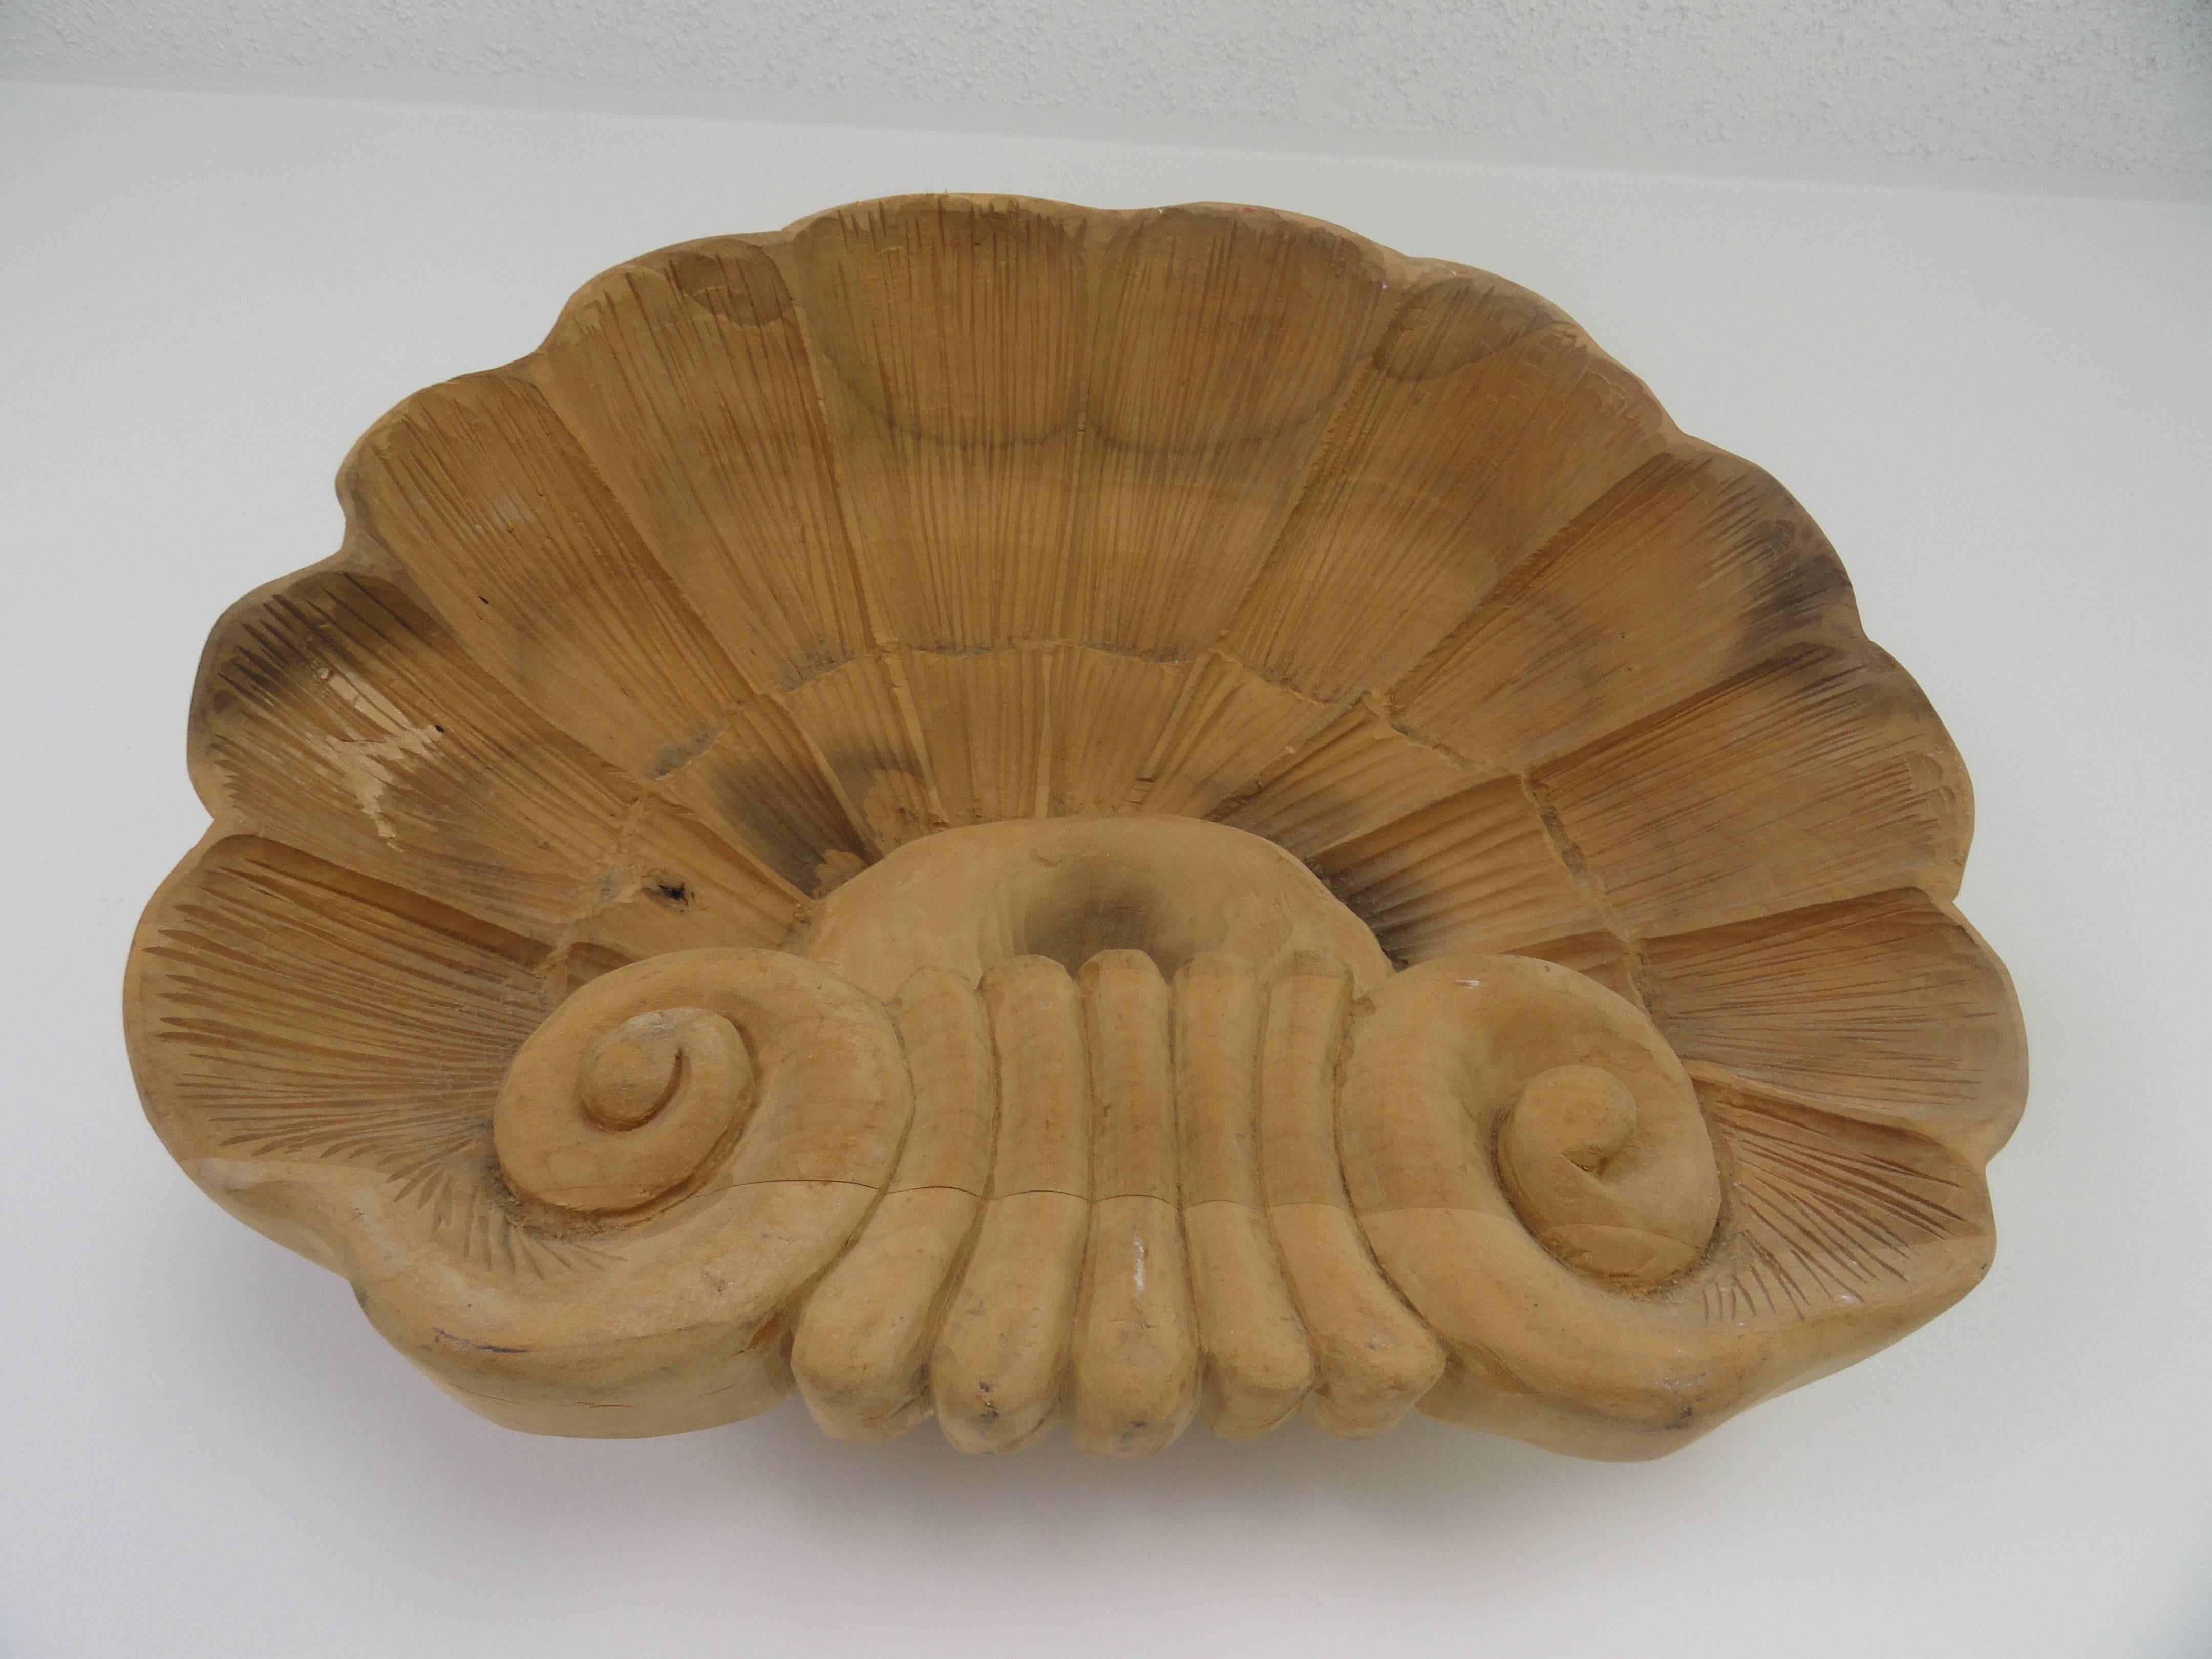 Hand-carved wood shell sculpture.